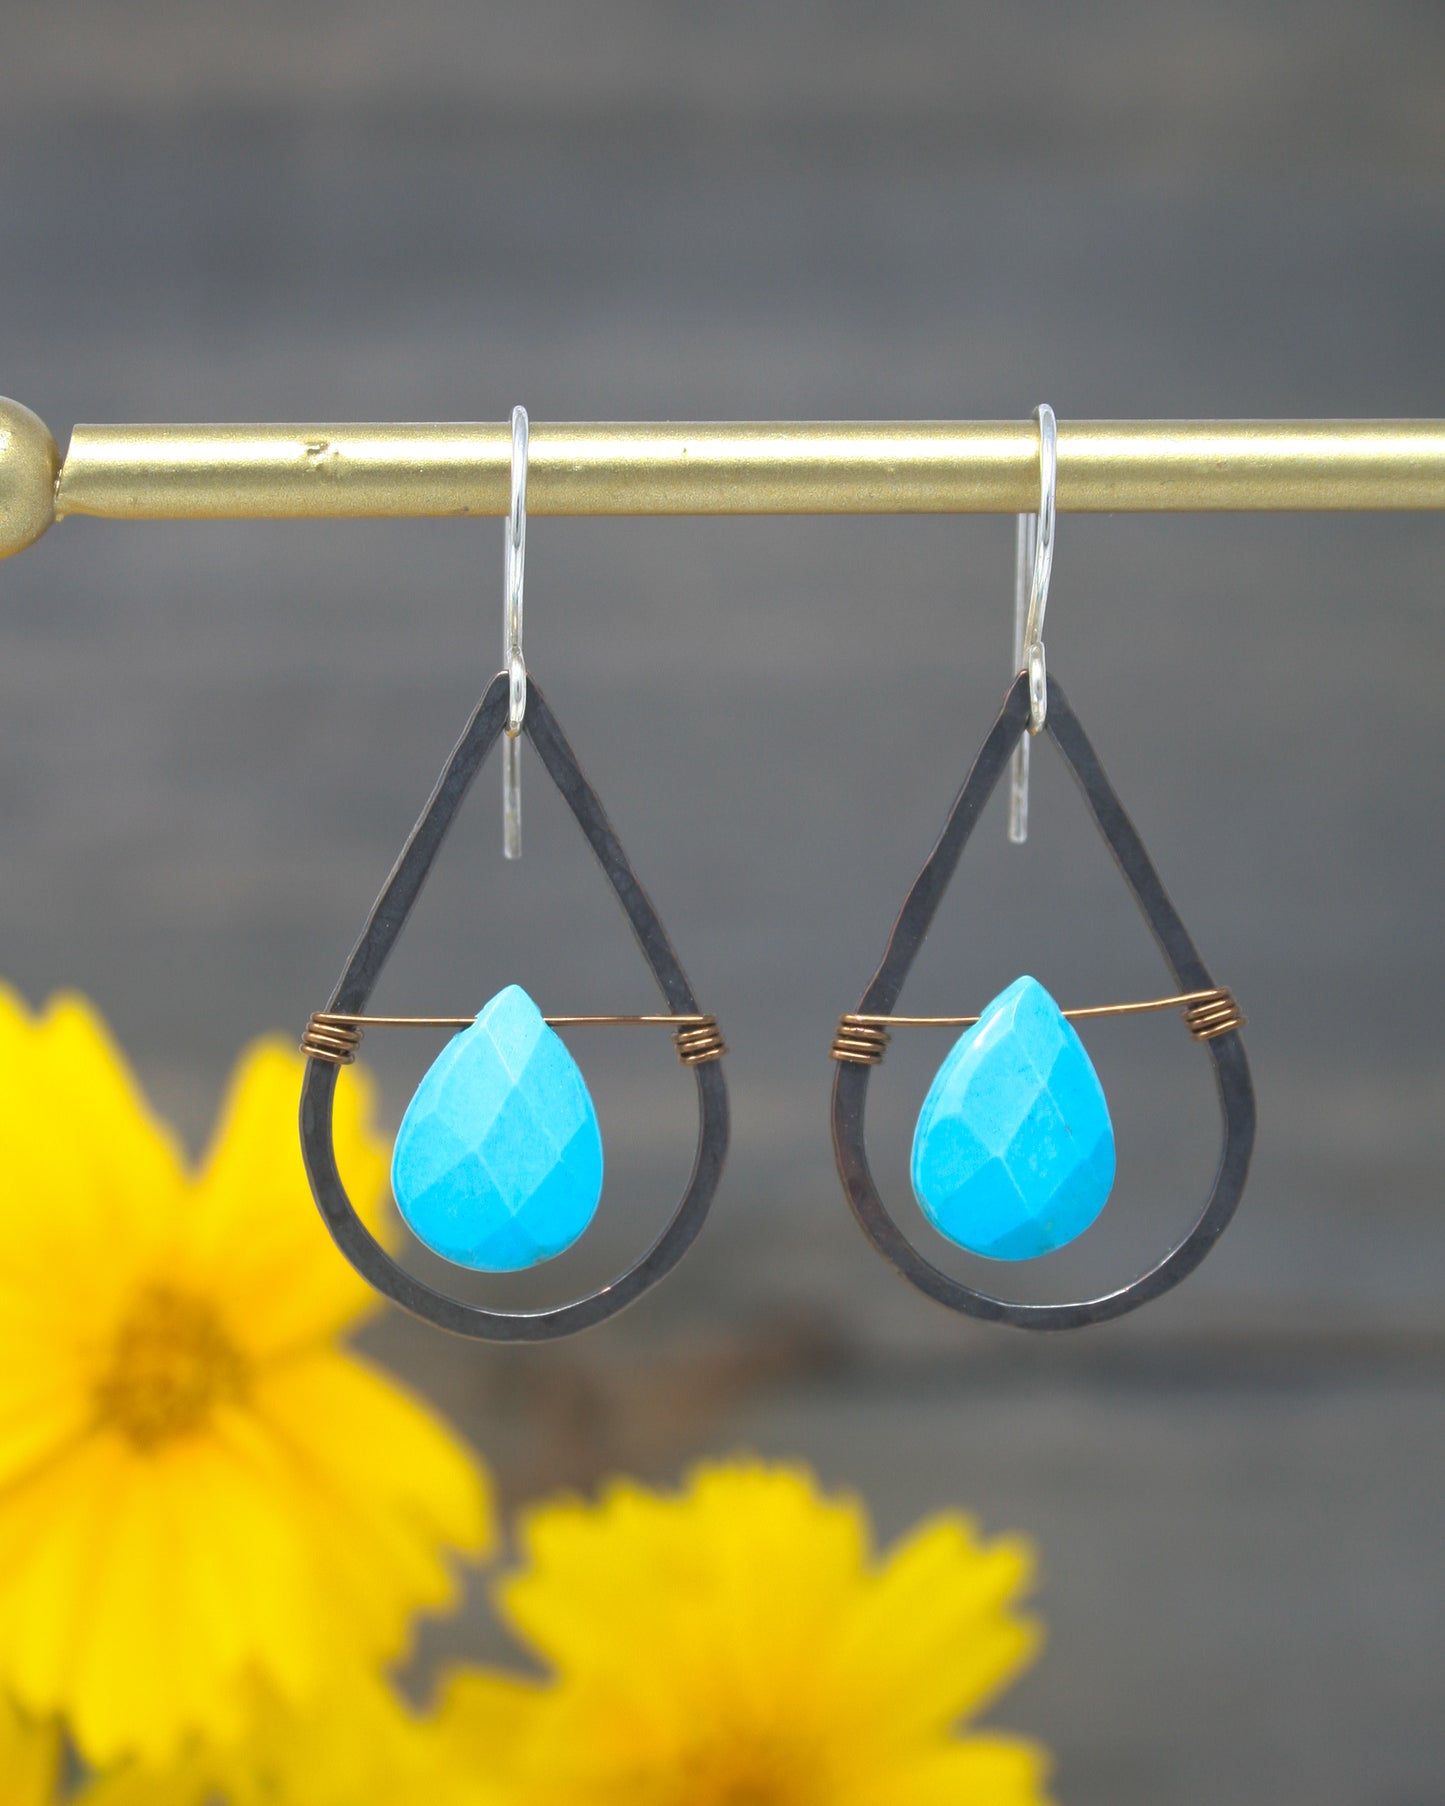 a pair of earrings hanging from a metal bar